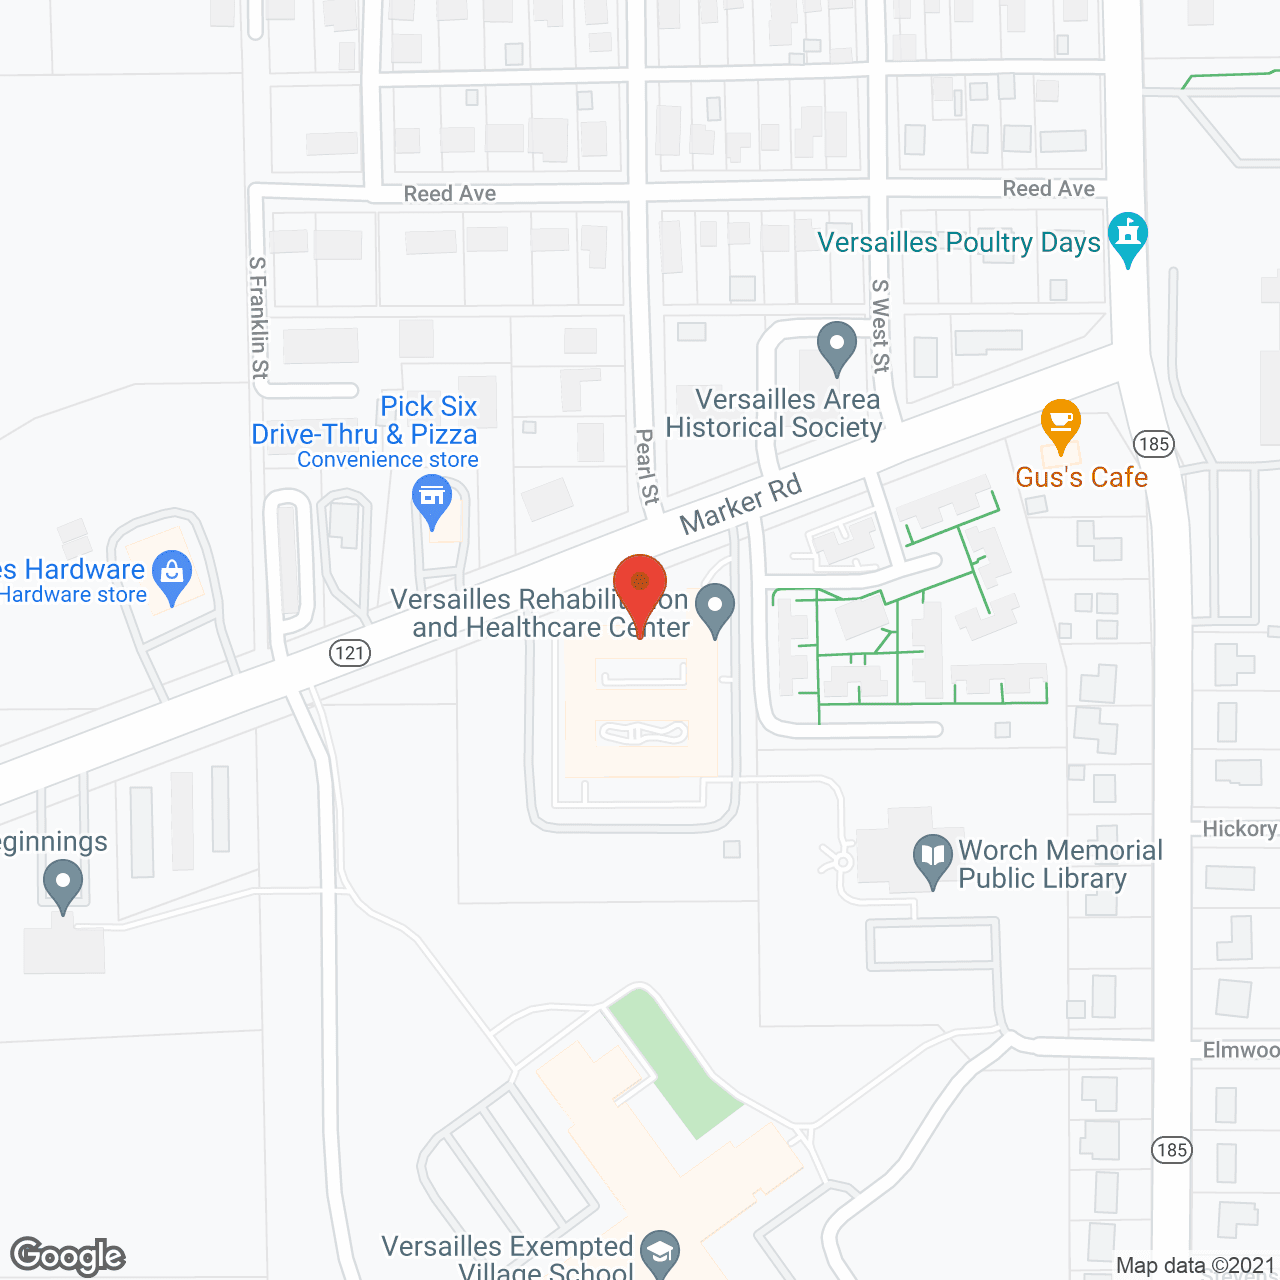 Versailles Health Care Center in google map